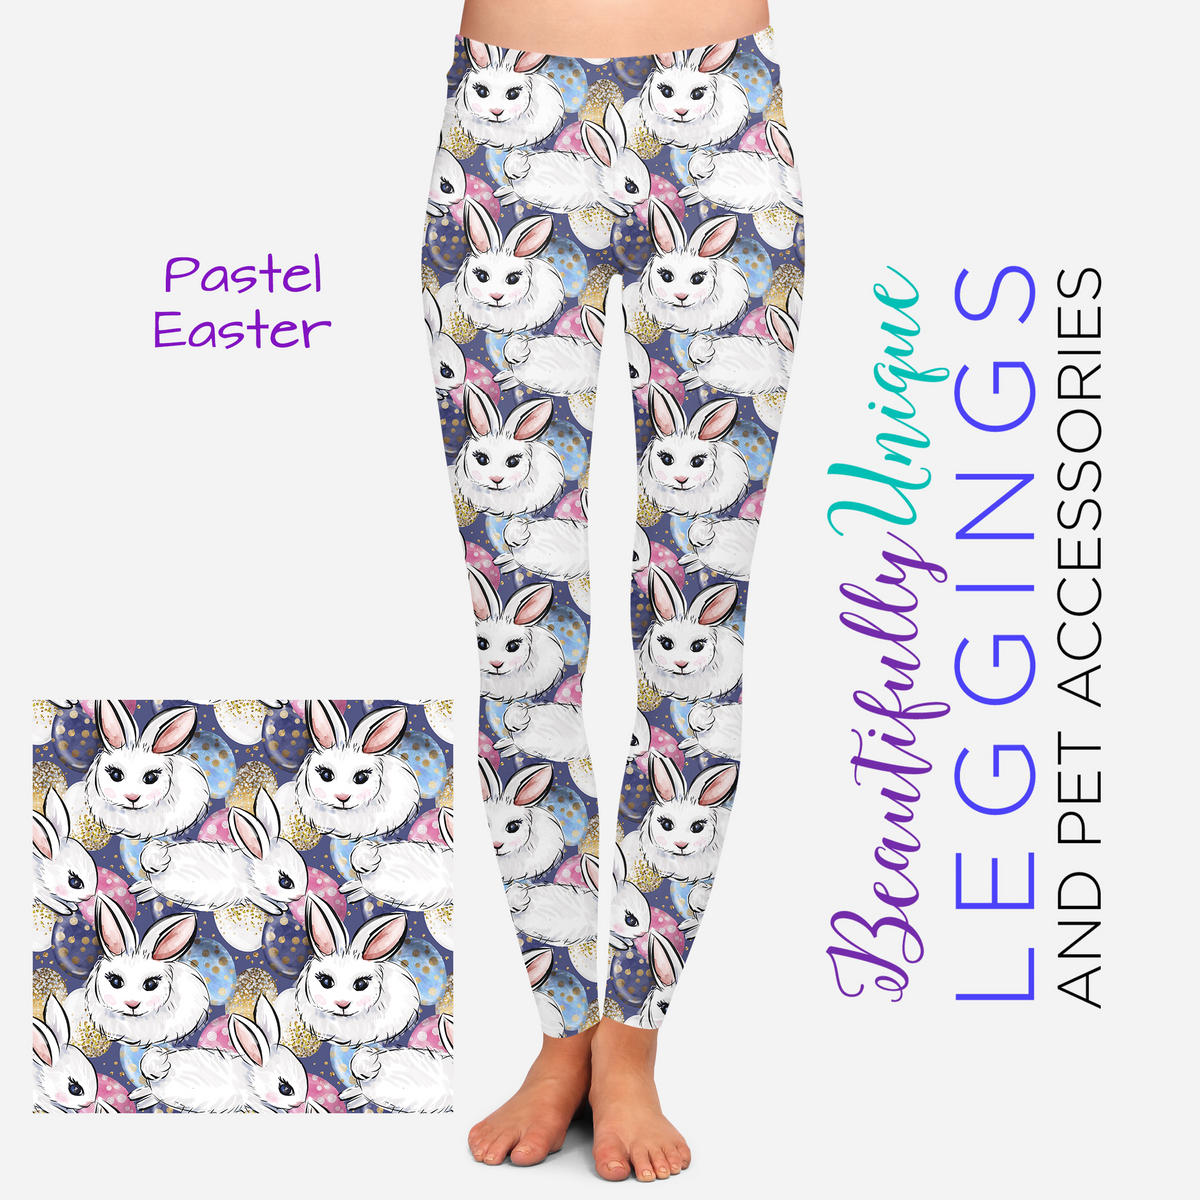 Easter Gnomes (Exclusive) - High-quality Handcrafted Vibrant Leggings –  Beautifully Unique Leggings